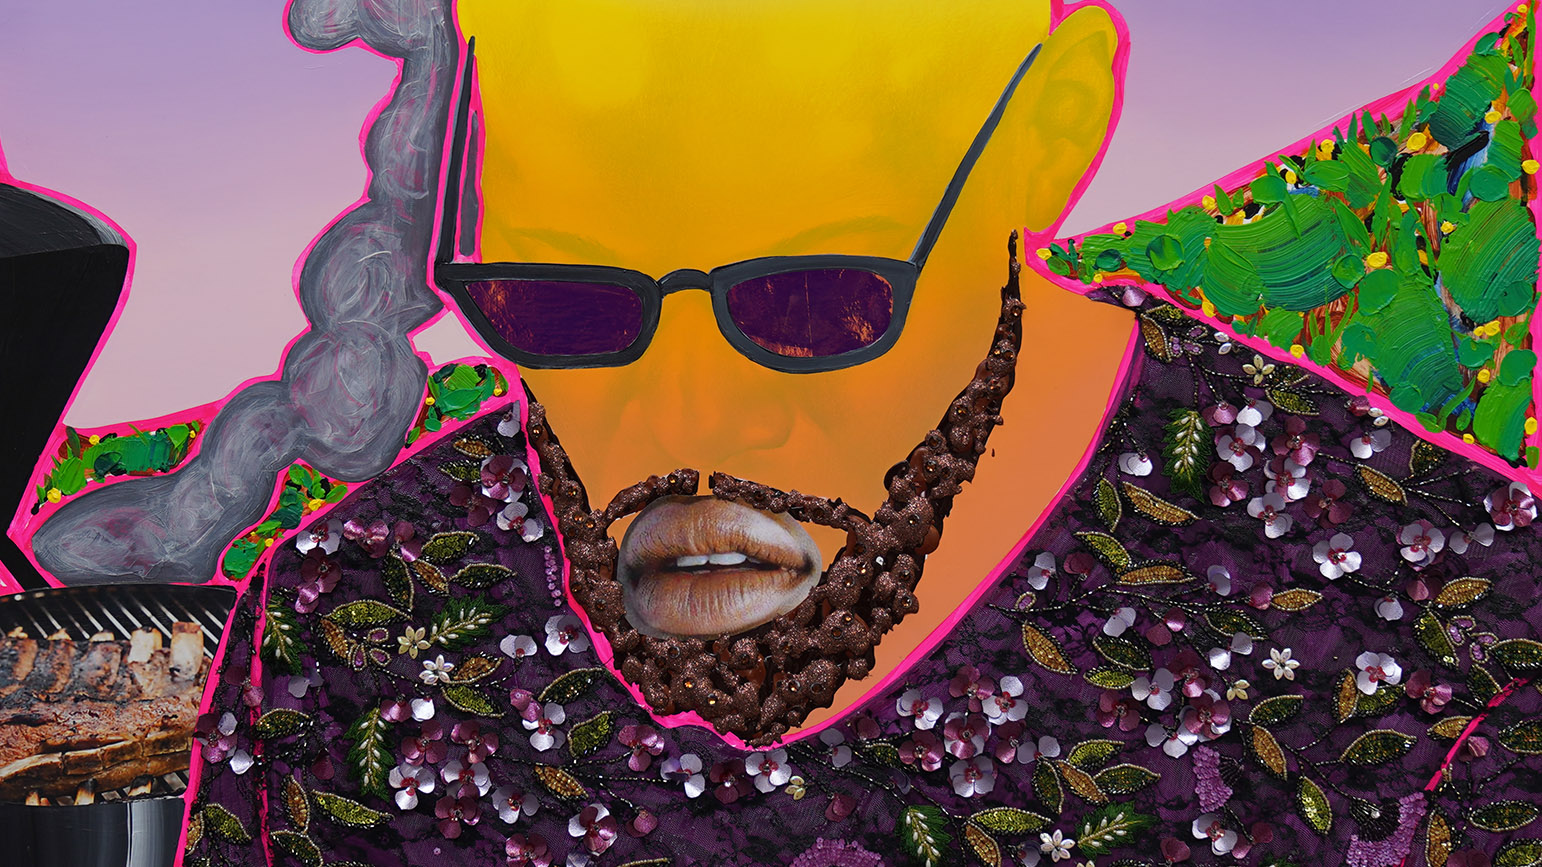 Painting of a man with sunglasses with a grill with ribs and smoke in the background.